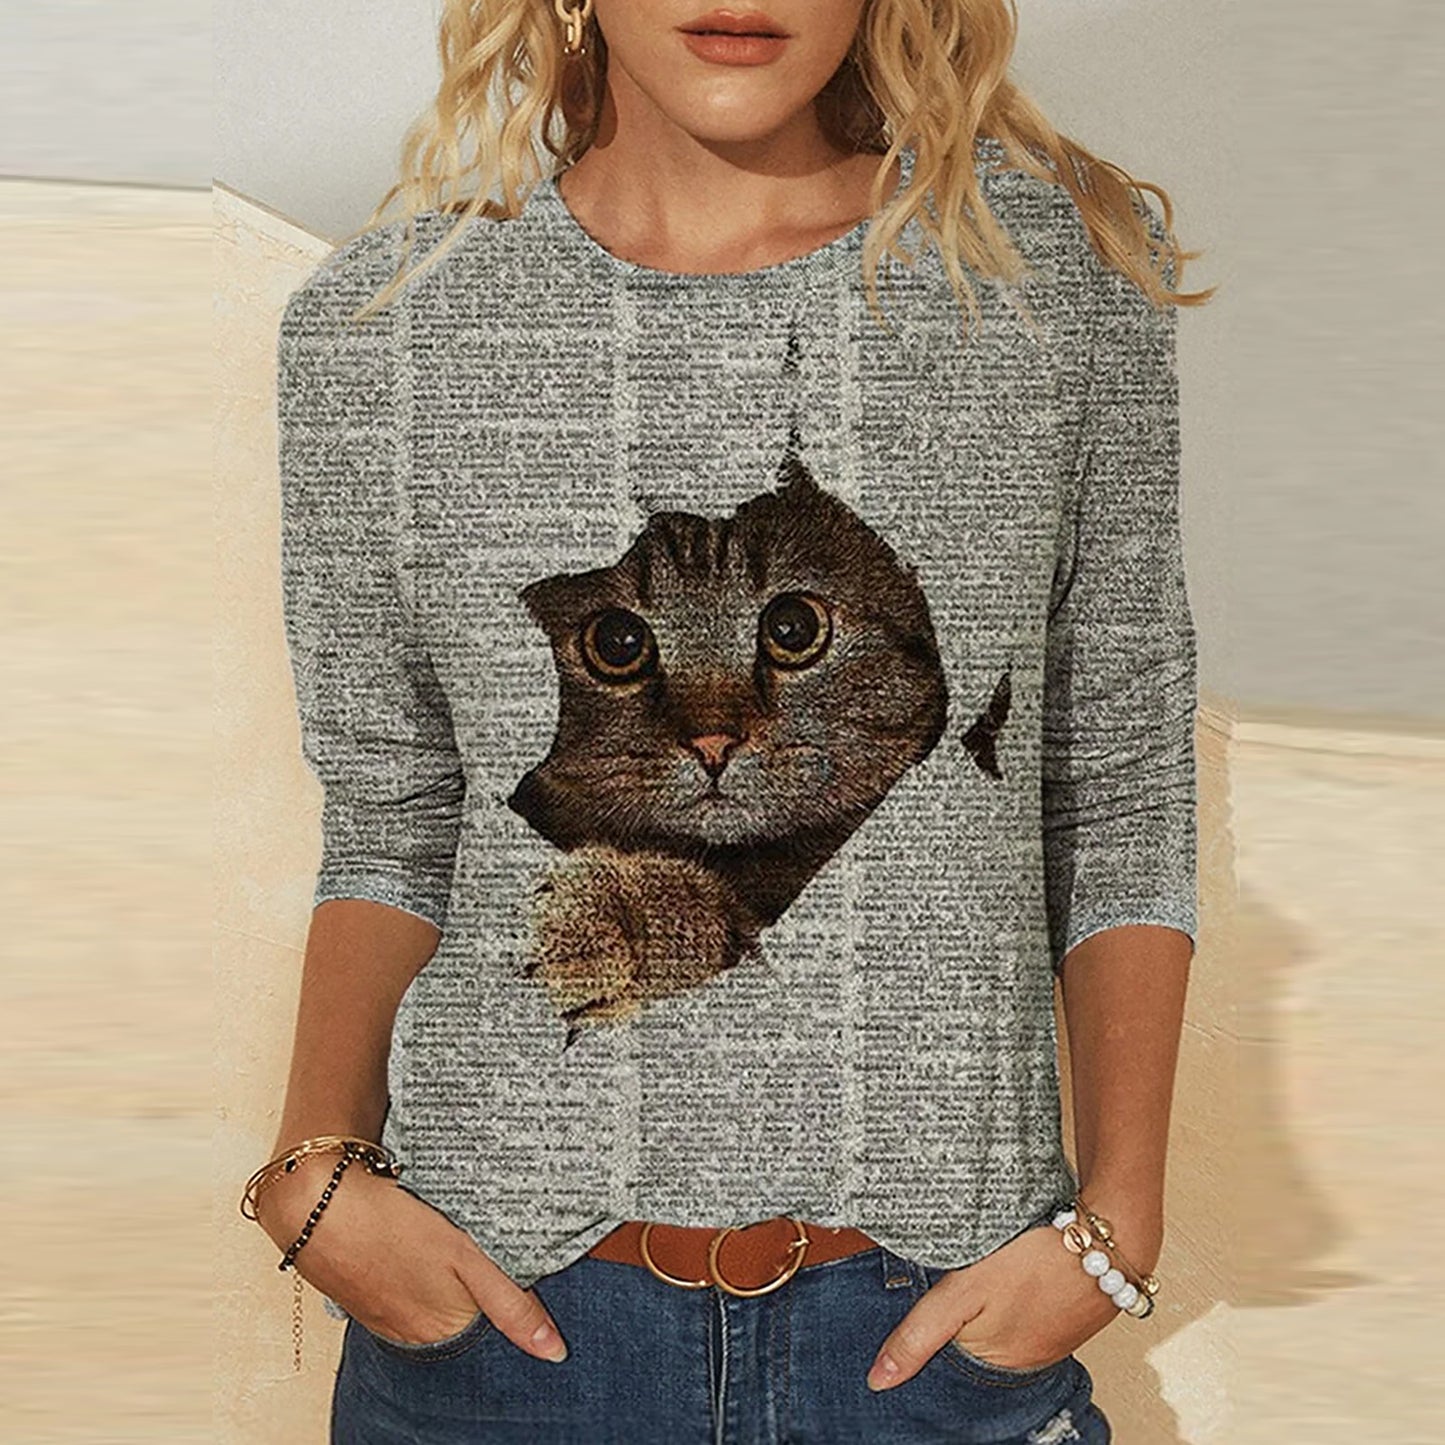 Tshirt  | Knitted Long Sleeve Printed Round Neck Women's T-Shirt | 7style |  2XL| thecurvestory.myshopify.com